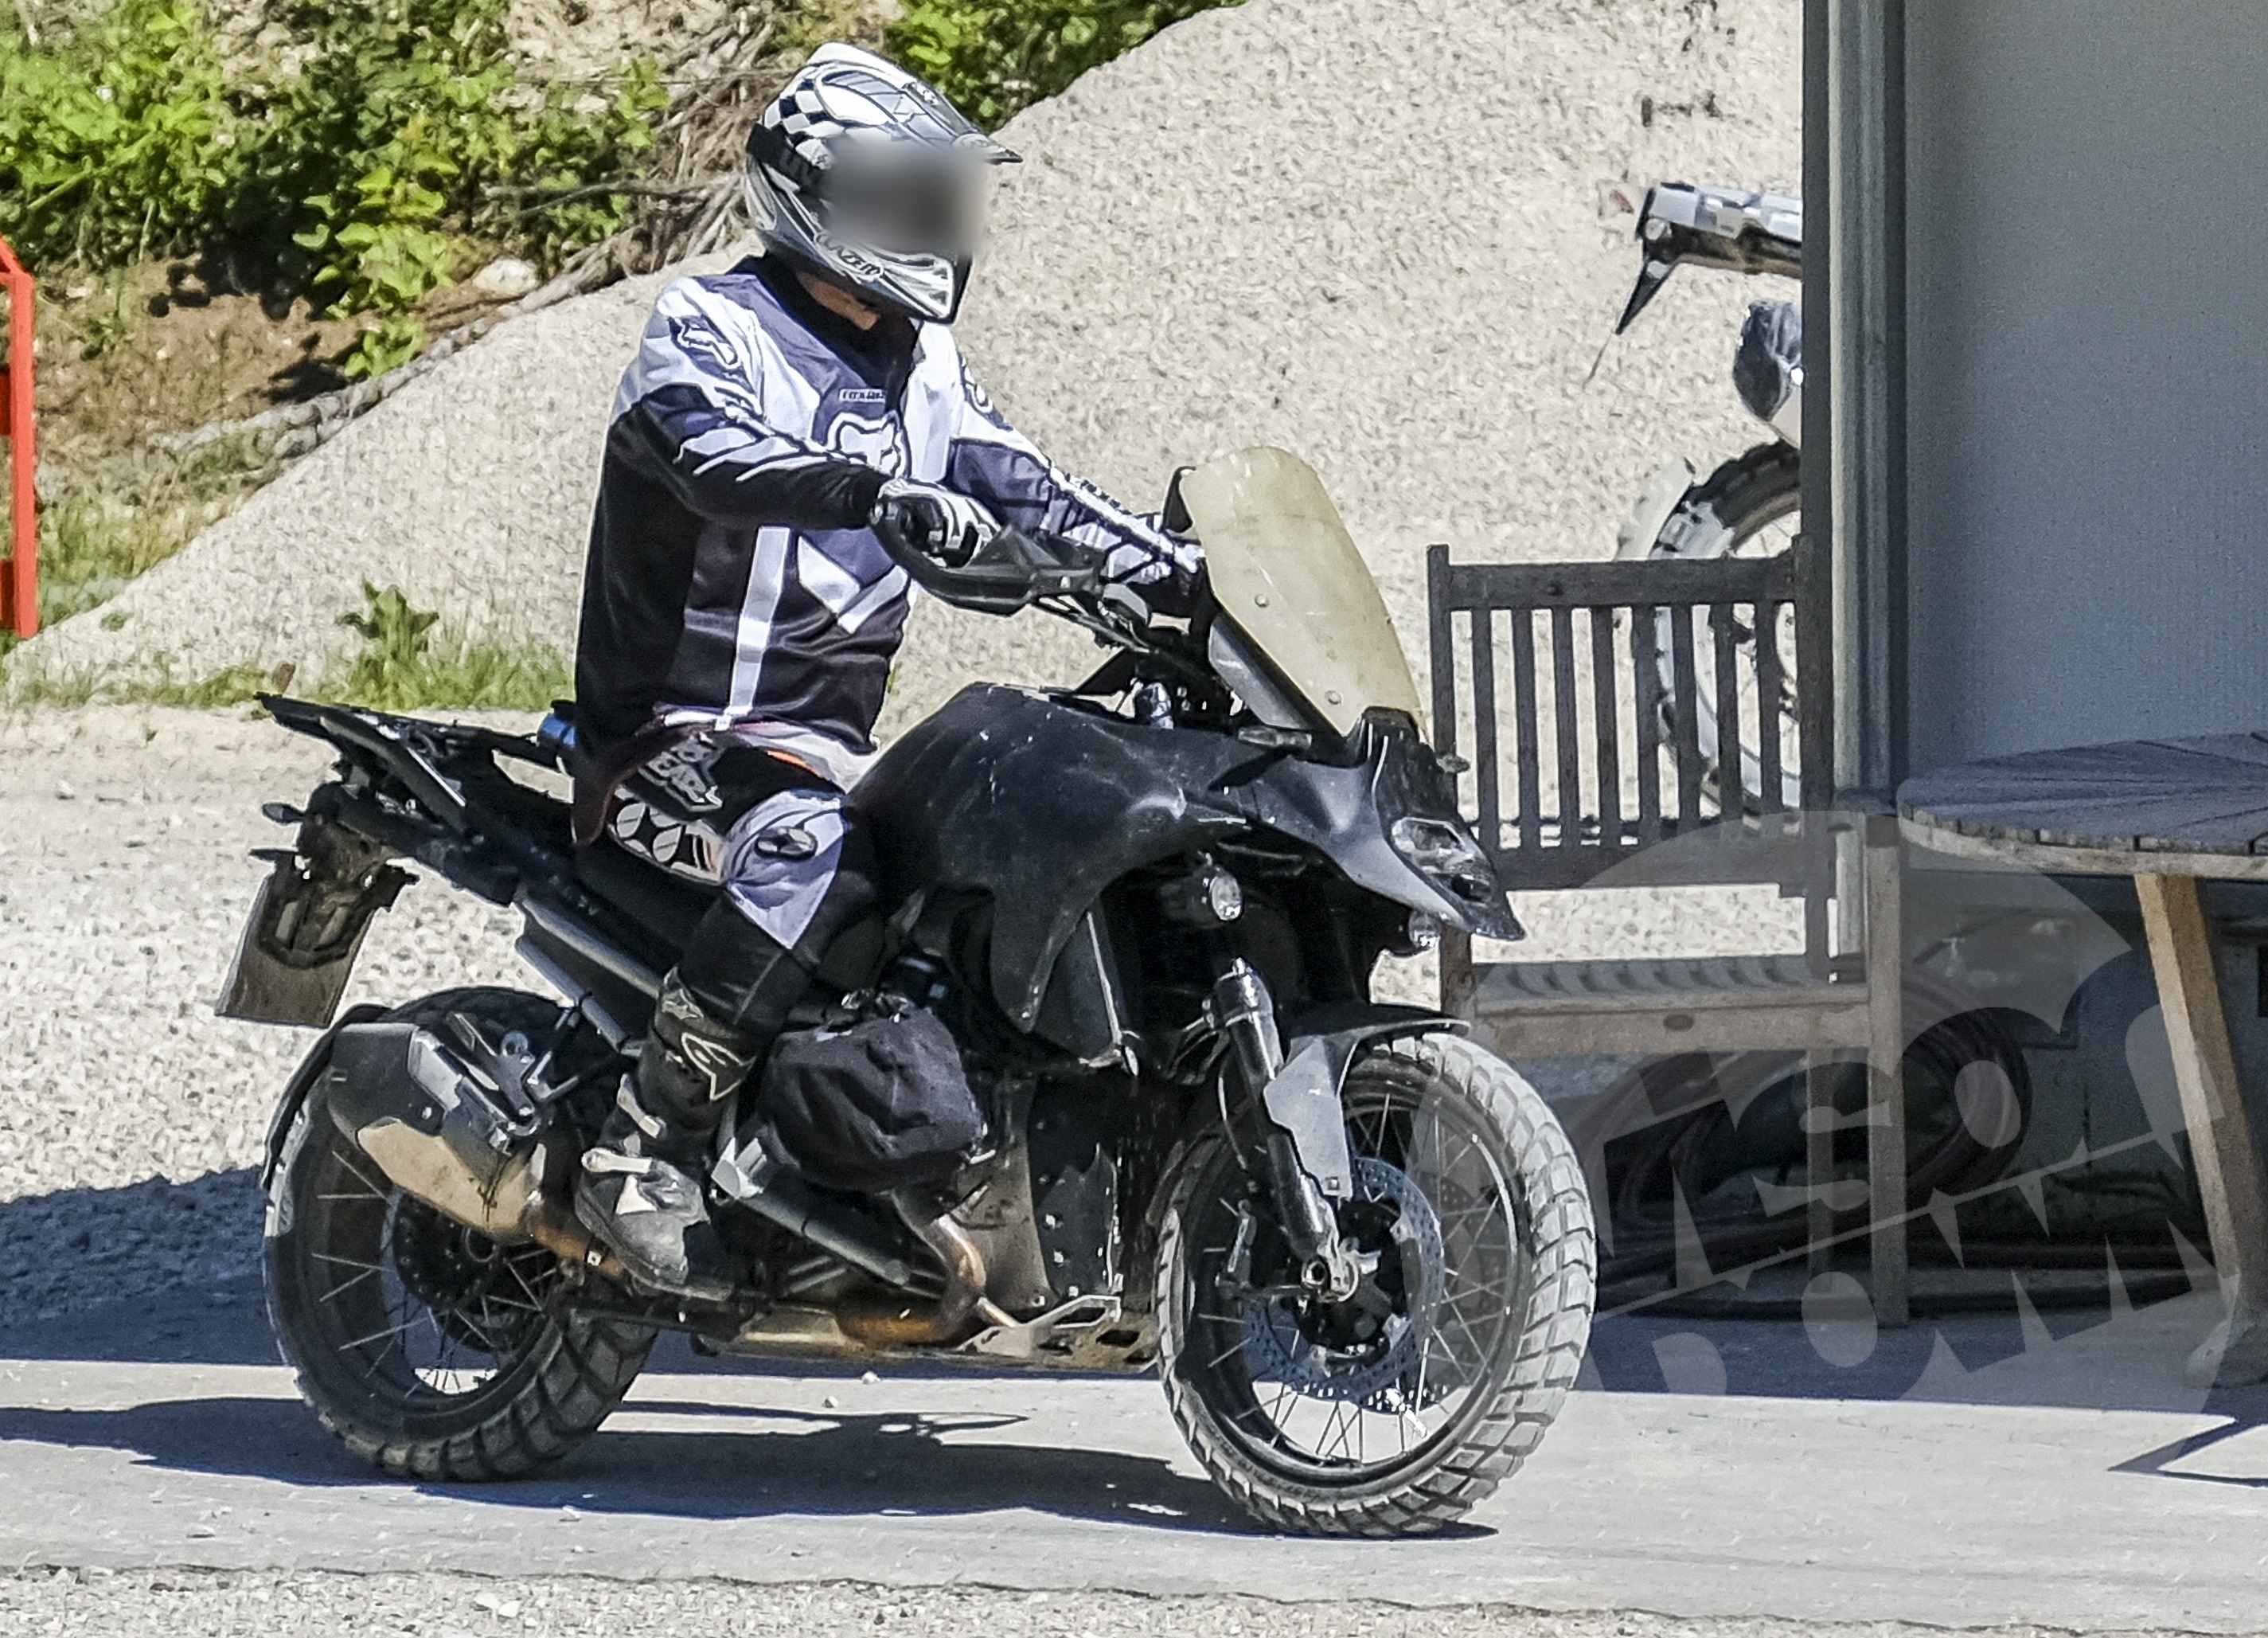 Exclusive BMW R 1300 GS spied for the first time! Visordown